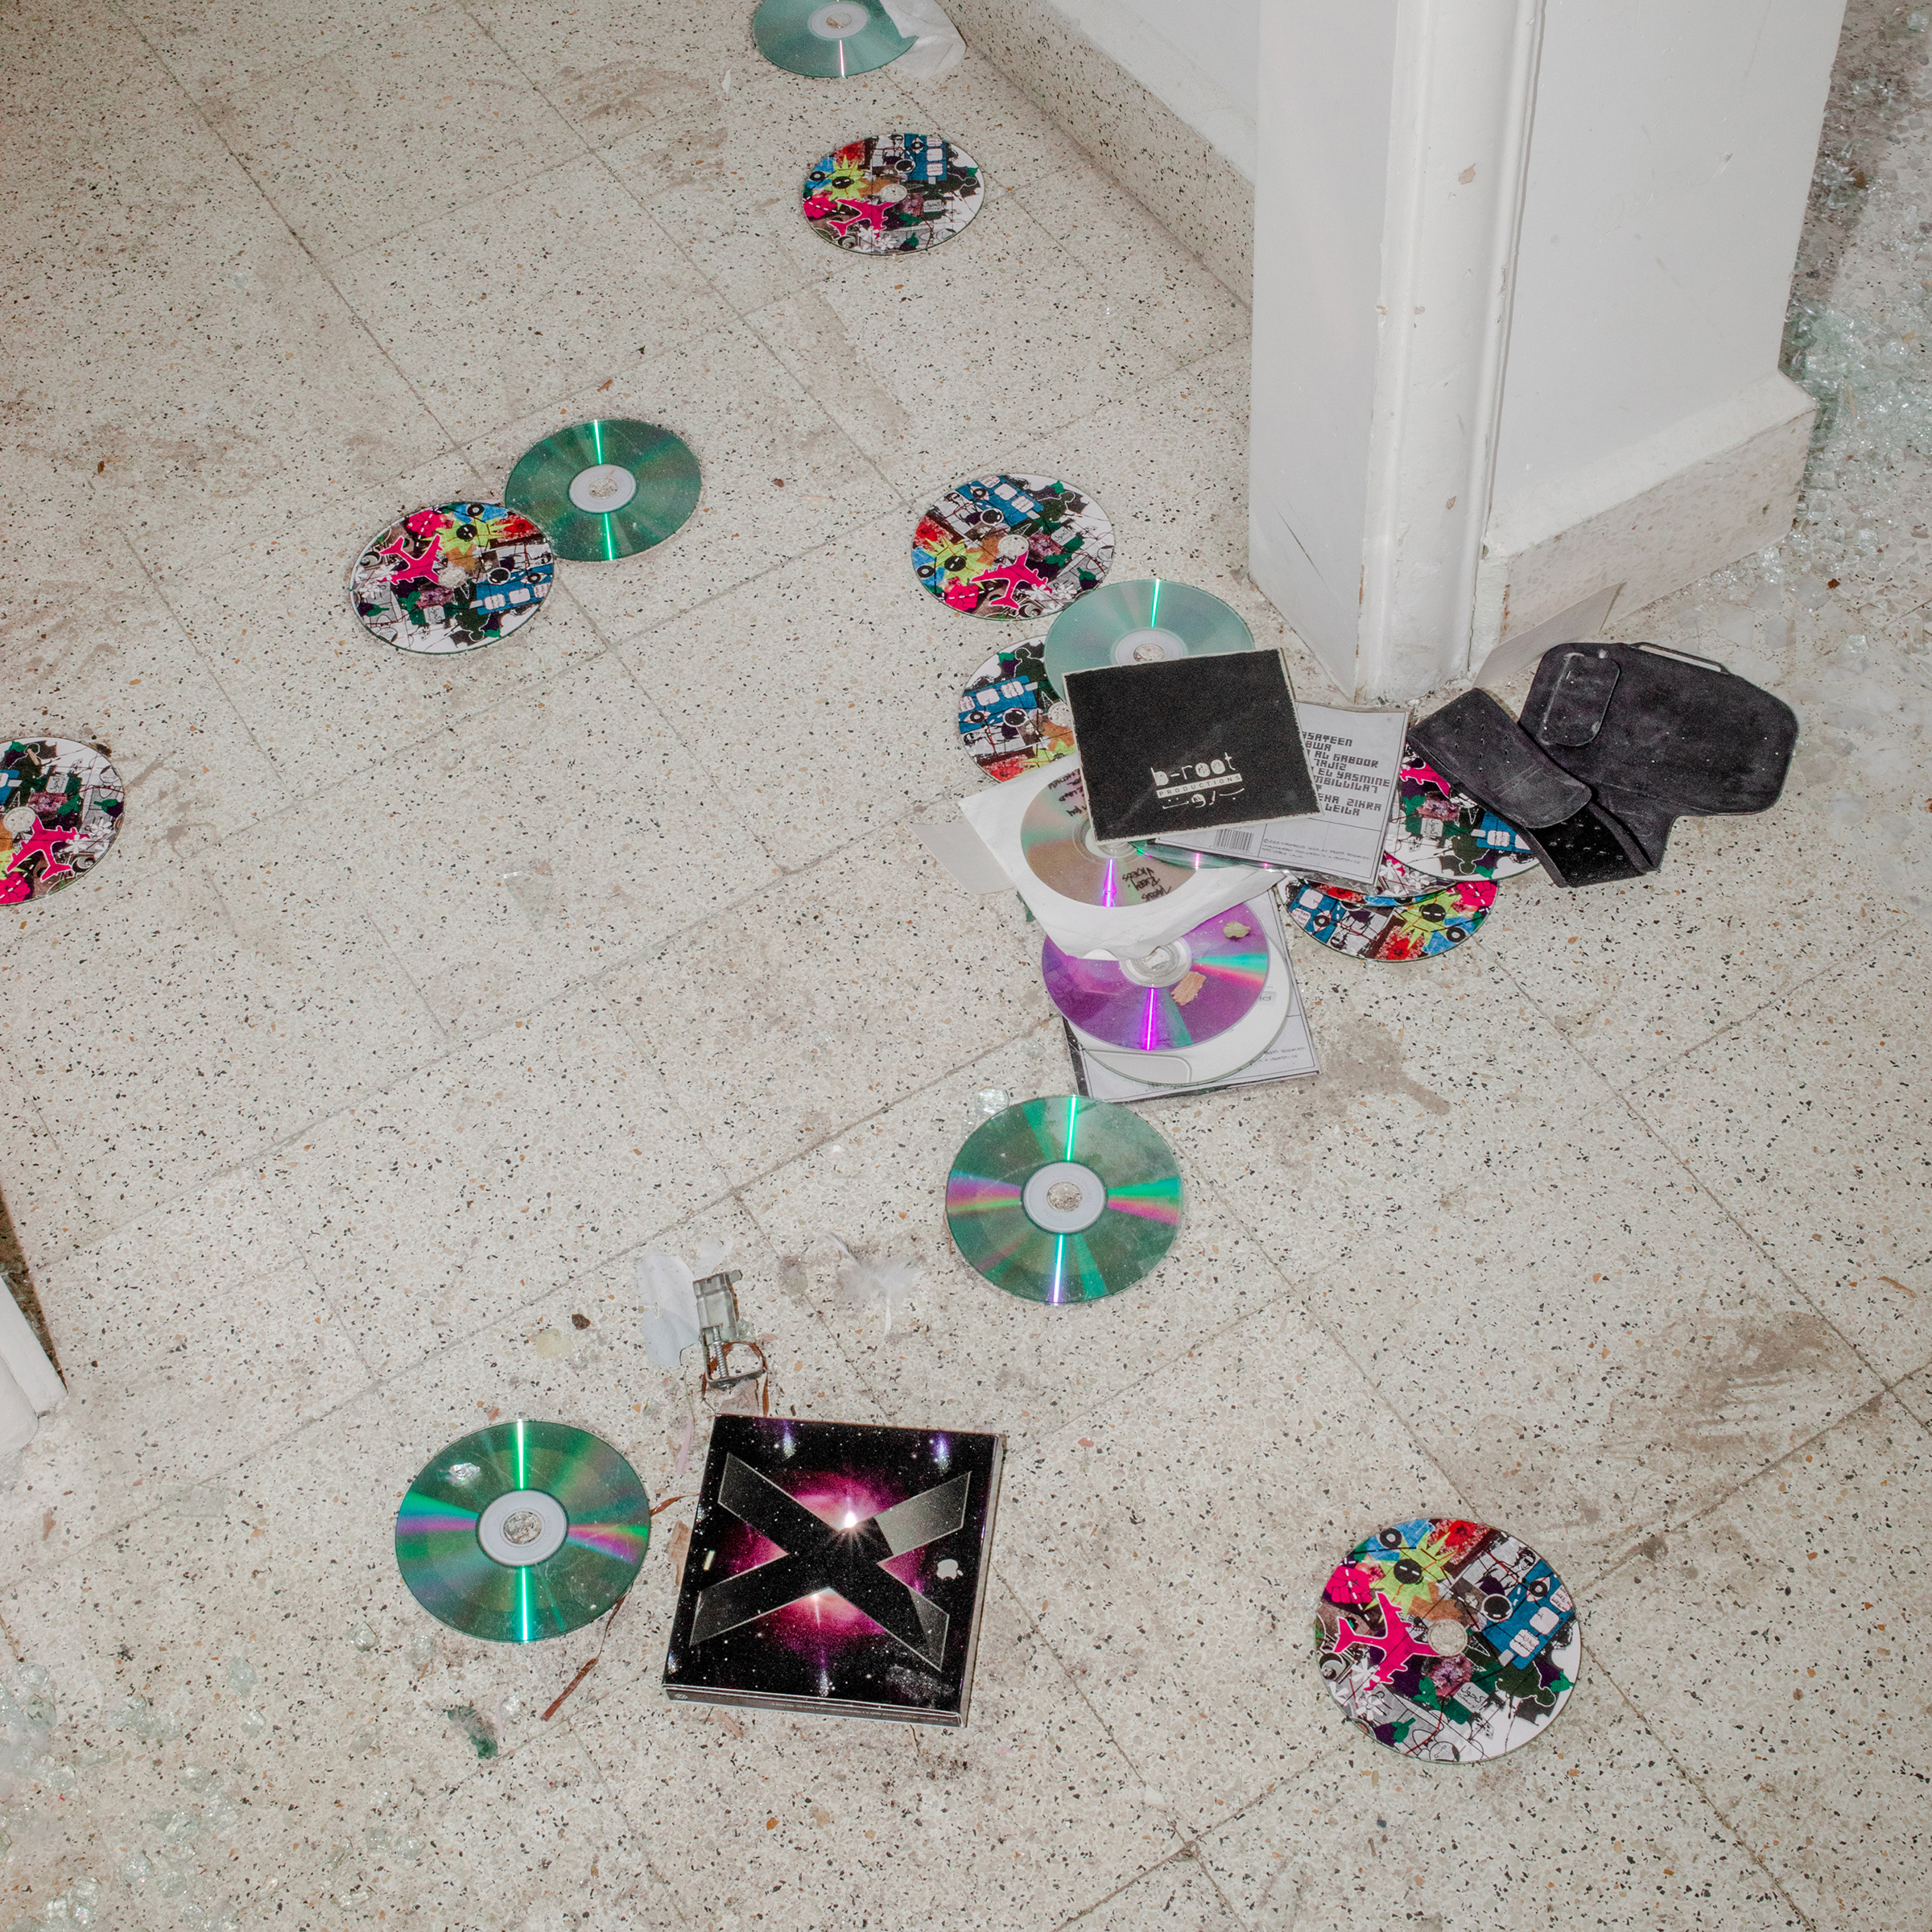 CDs are scattered on the floor of music producer Jana Saleh's apartment, which was heavily damaged by the port explosion and blast wave. "I Google-mapped the distance between the blast and my home. It’s approximately two kilometers (1.24 mi.). We managed to hide in the glassless bathroom right on time and survived it," says Saleh. "The concept is a thing of the 80s, during the civil war. The kids and the valuables were hidden in the bathroom. My brother and I spent a lot of time in it. On Aug. 4, I dragged my girlfriend to it. She’s the valuable in this story." (Myriam Boulos for TIME)